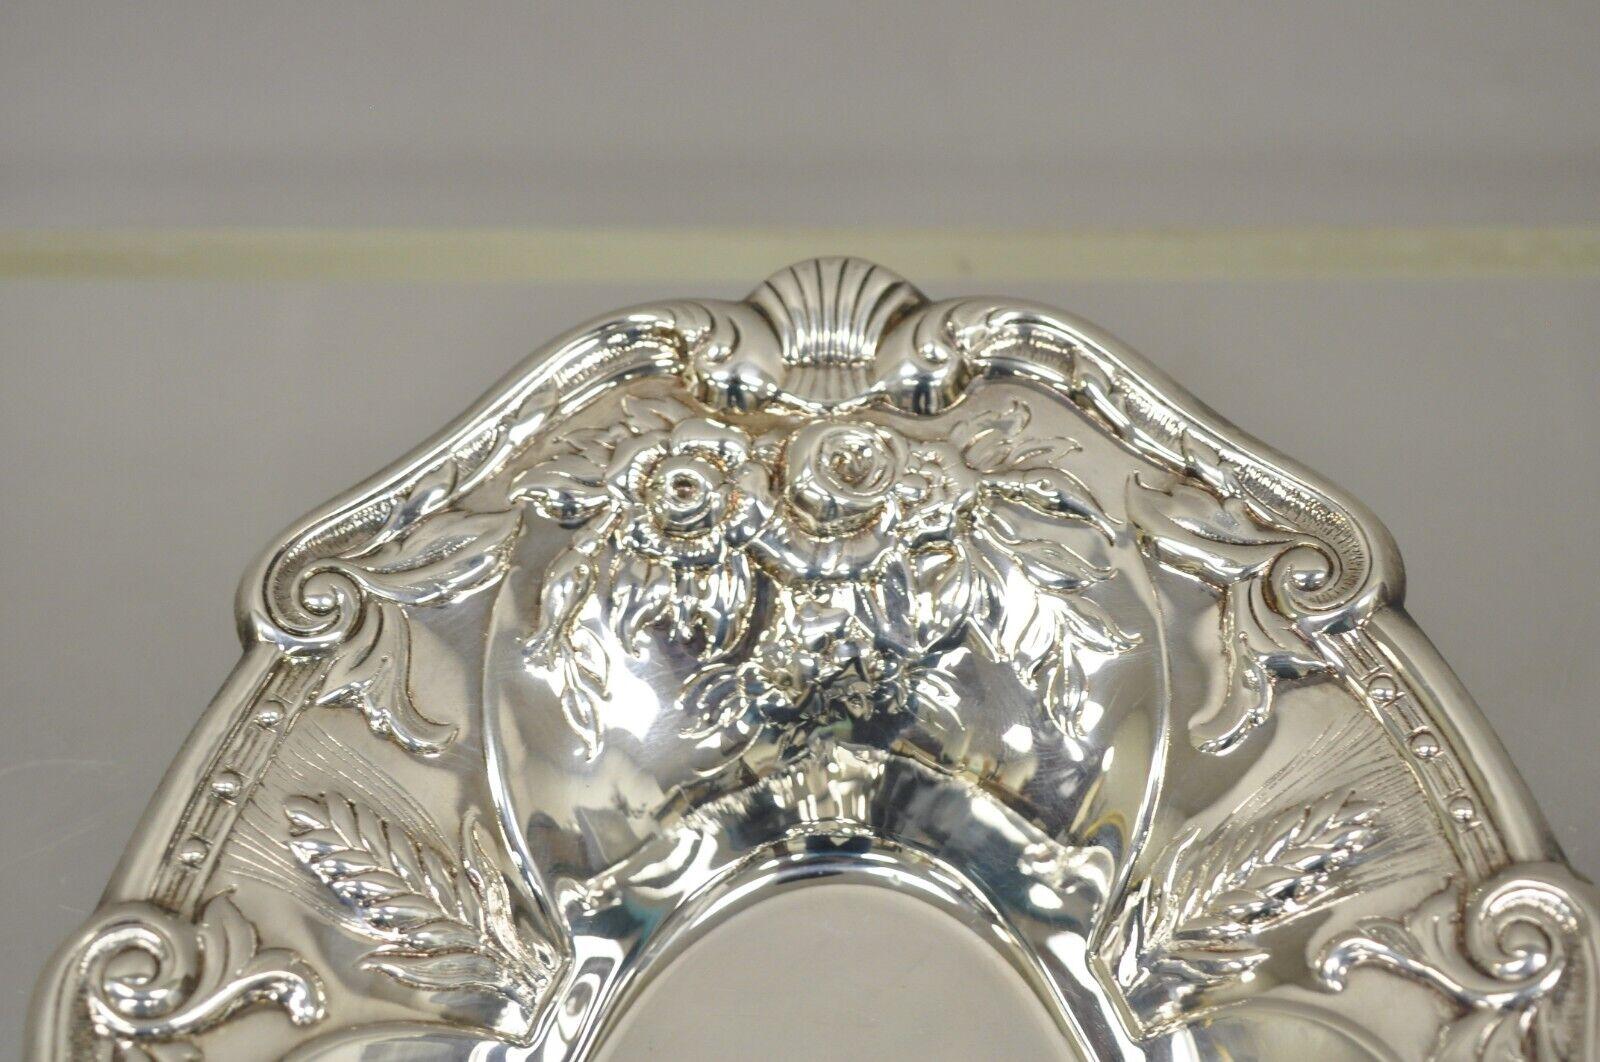 Vintage Floral Embossed Victorian Silver Plate Oval Dish by PS & Co In Good Condition For Sale In Philadelphia, PA